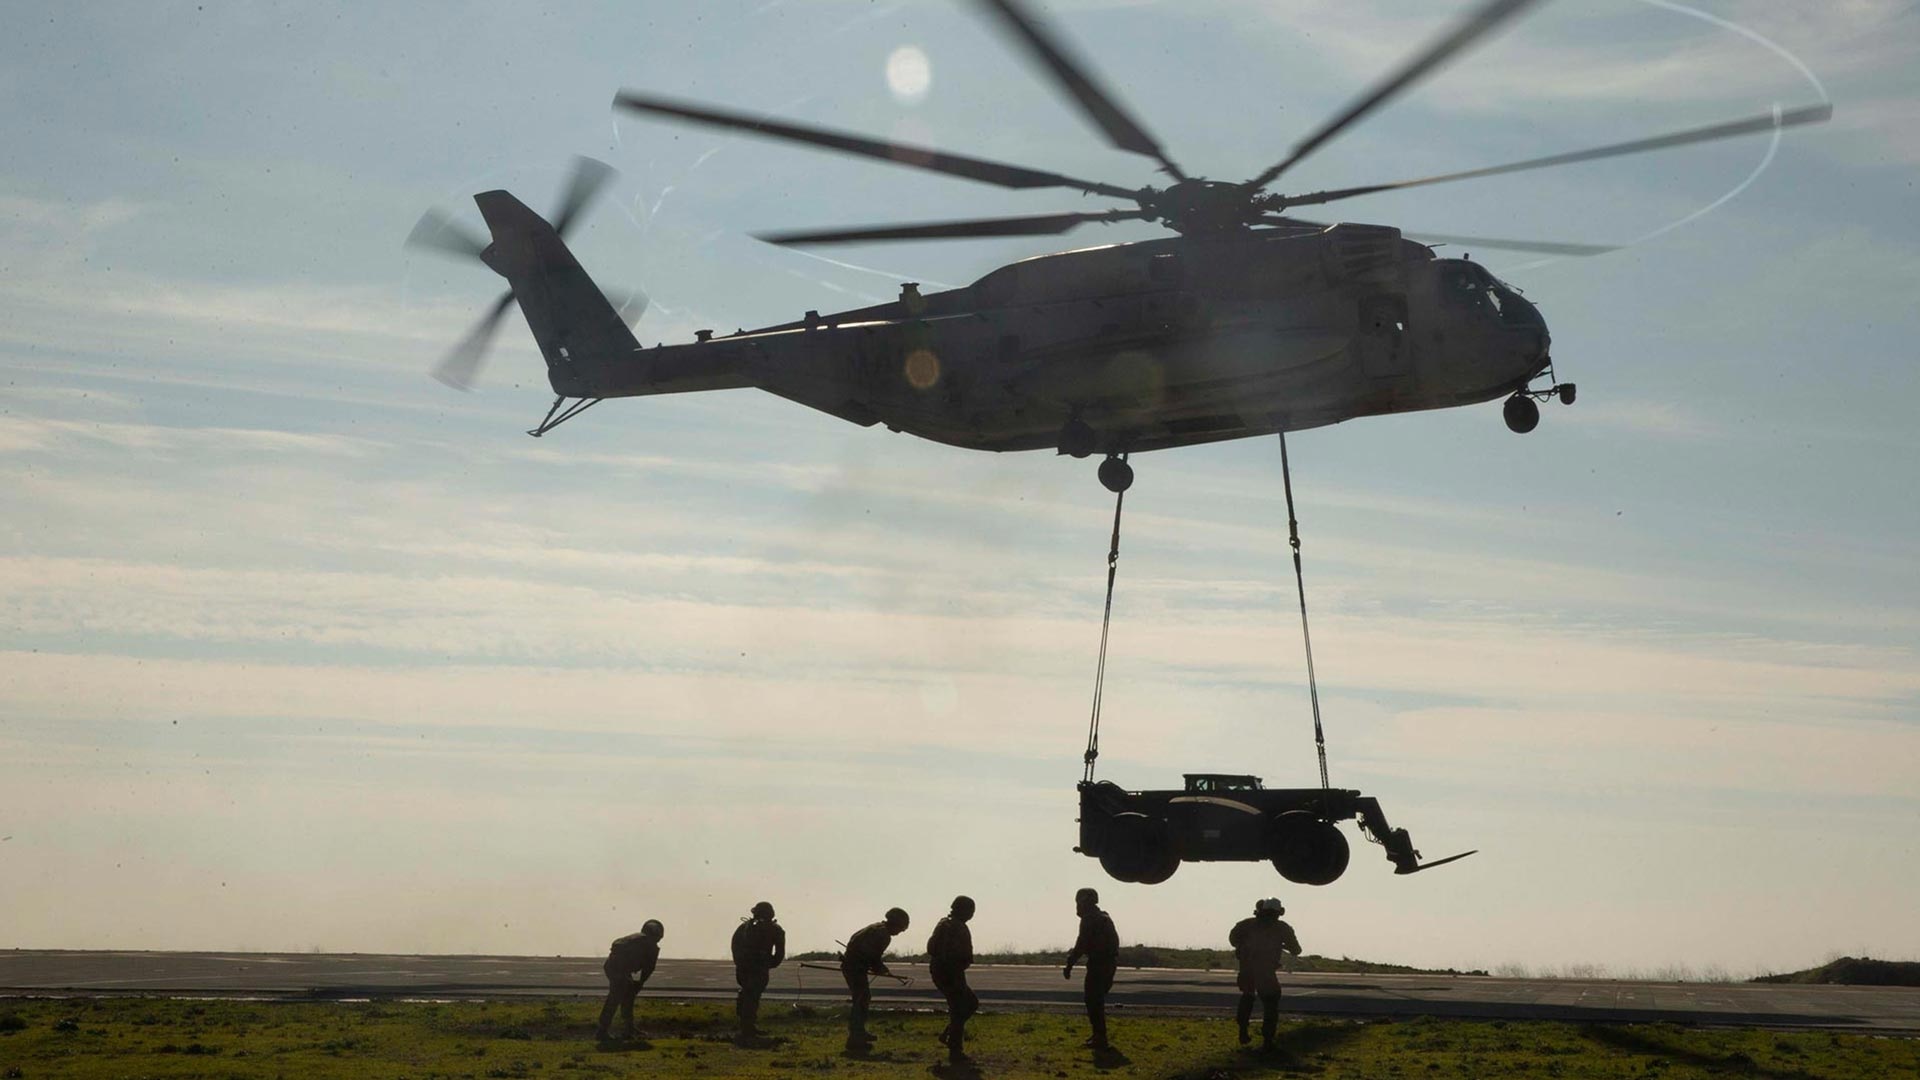 U.S. Marines with 1st Marine Logistics Group, 1st Transportation Support Battalion, Landing Support Company conduct an external lift testing the limits of the CH-53E Super Stallion, on Camp Pendleton, CA, January 15, 2019.